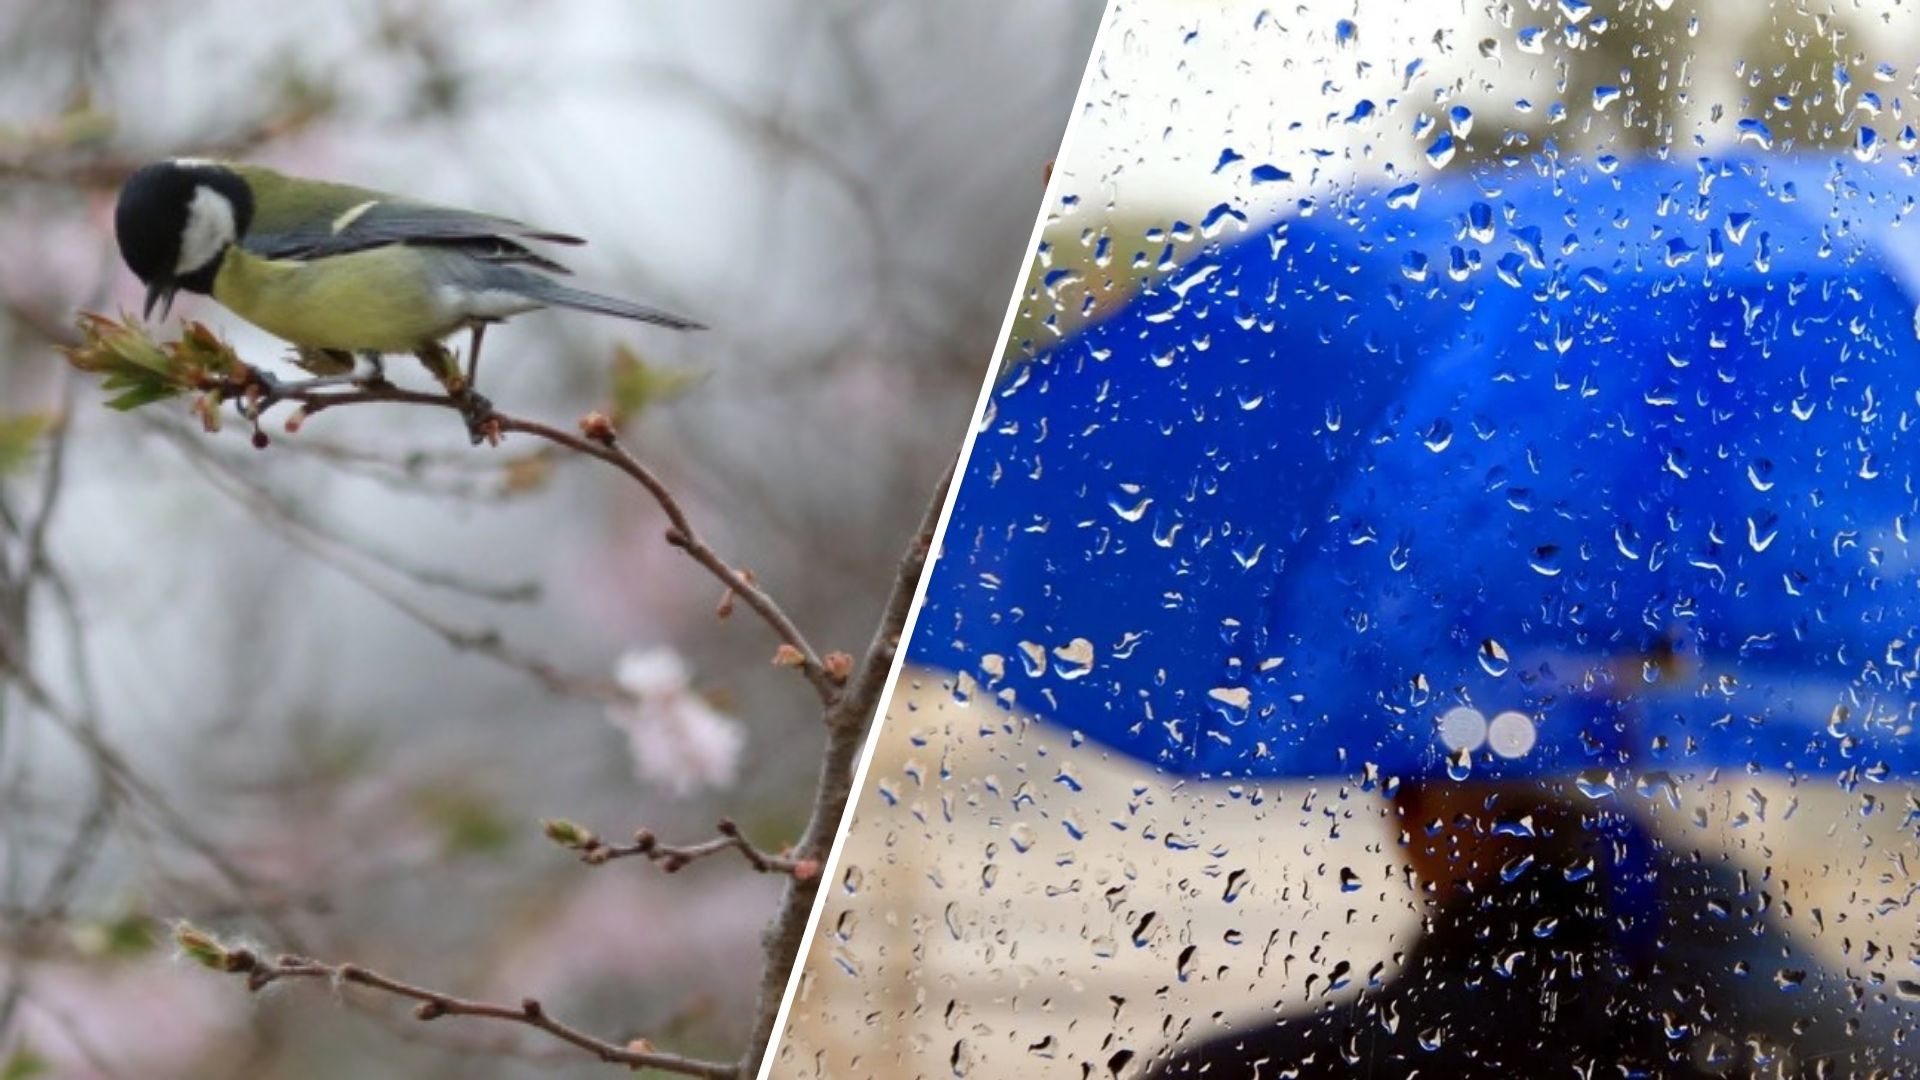 On Tuesday, April 2, the weather almost throughout Ukraine will still be warm and dry, but in the west of the country it will get colder and rain.